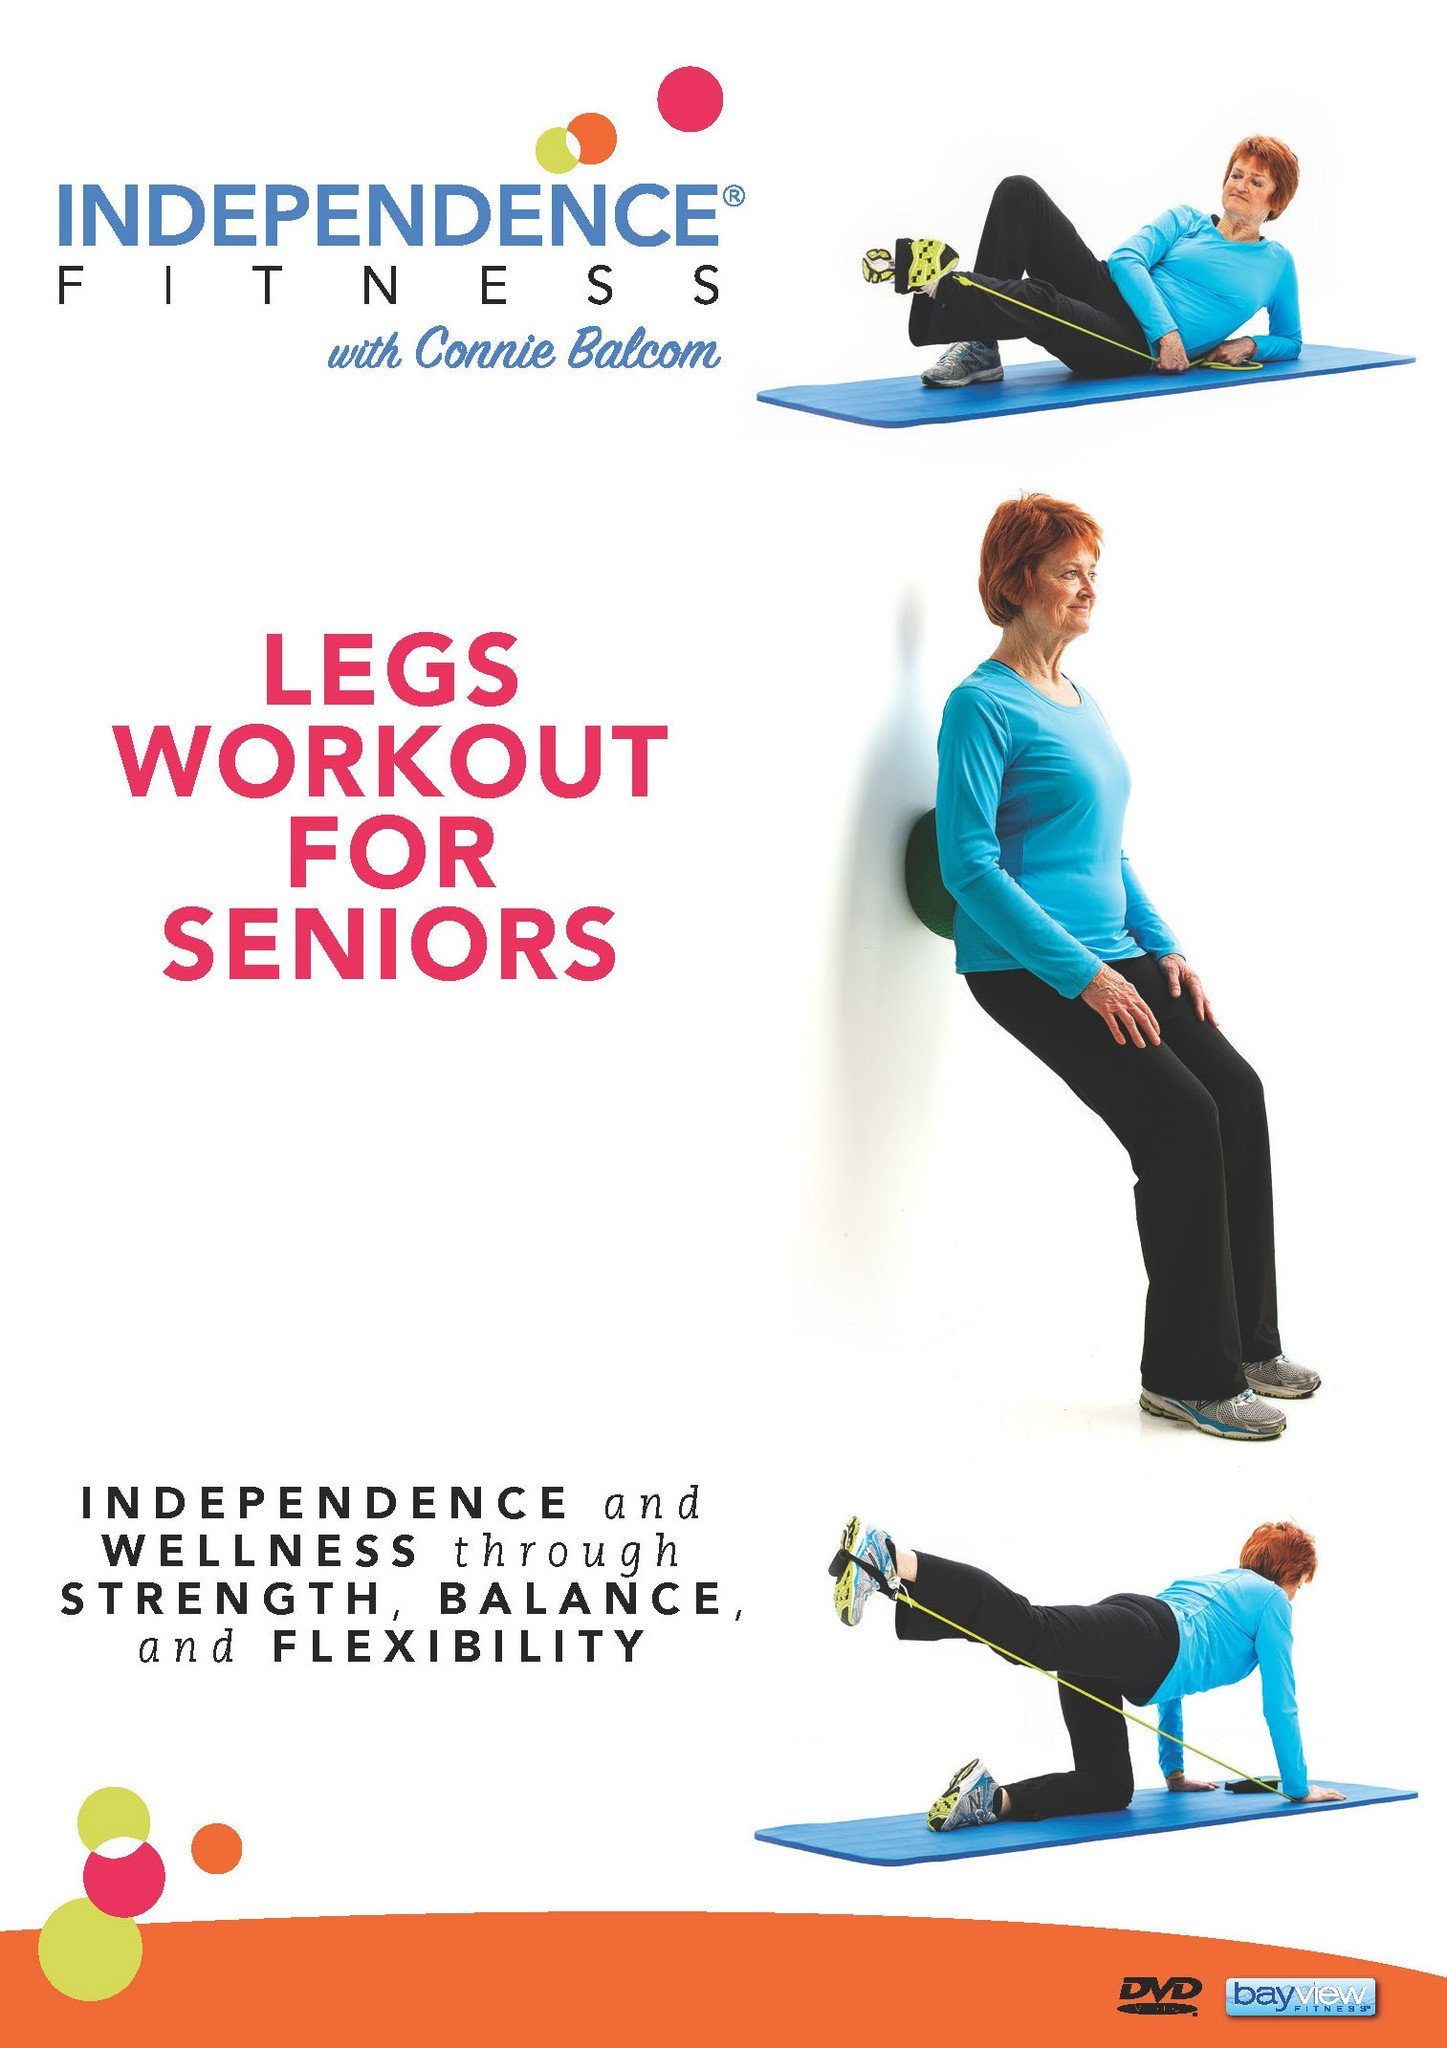 Exercise for Seniors: Working Out To Keep Your Independence